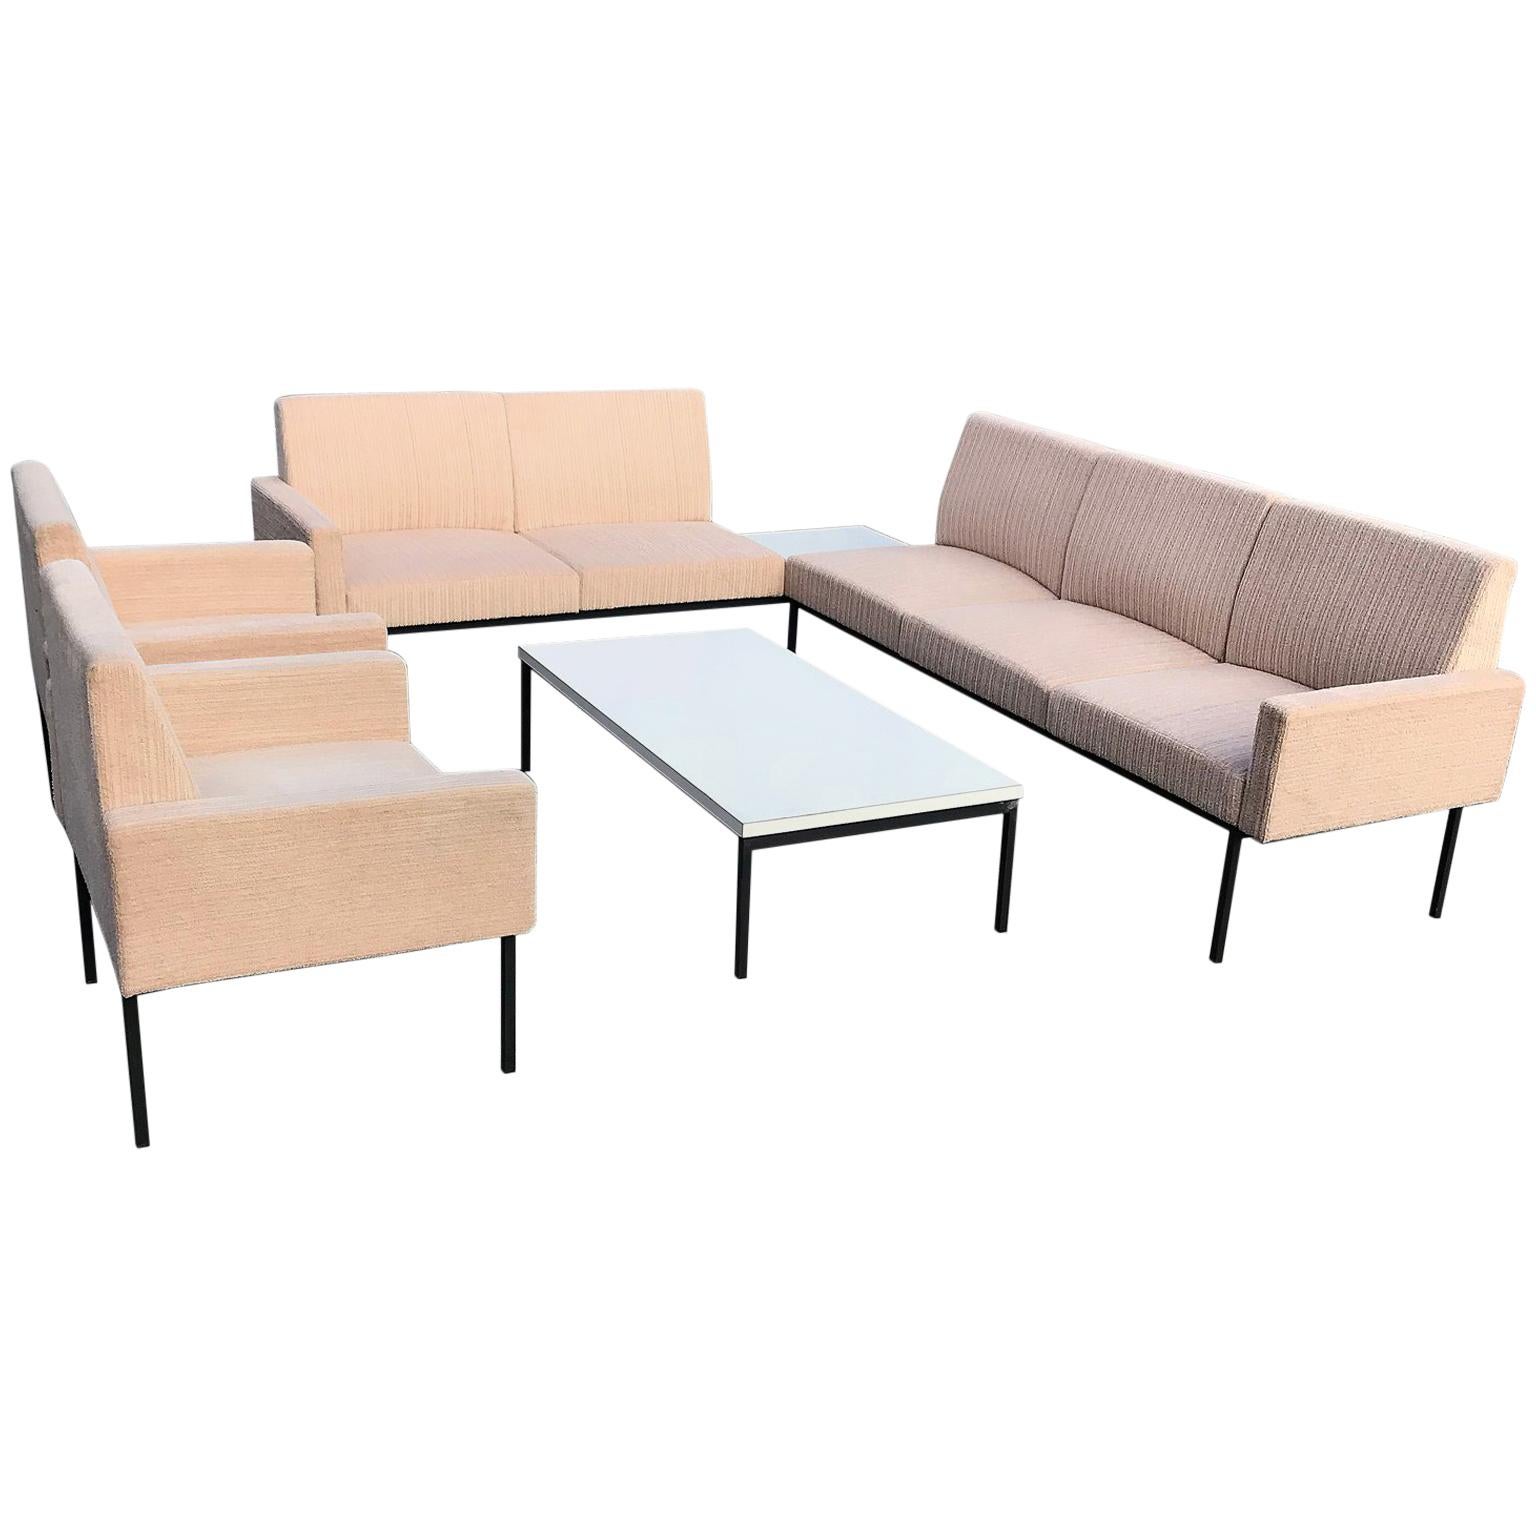 Modular Seating Group from Thonet, 1960s, Seating Elements, Lobby Sofa Beige 